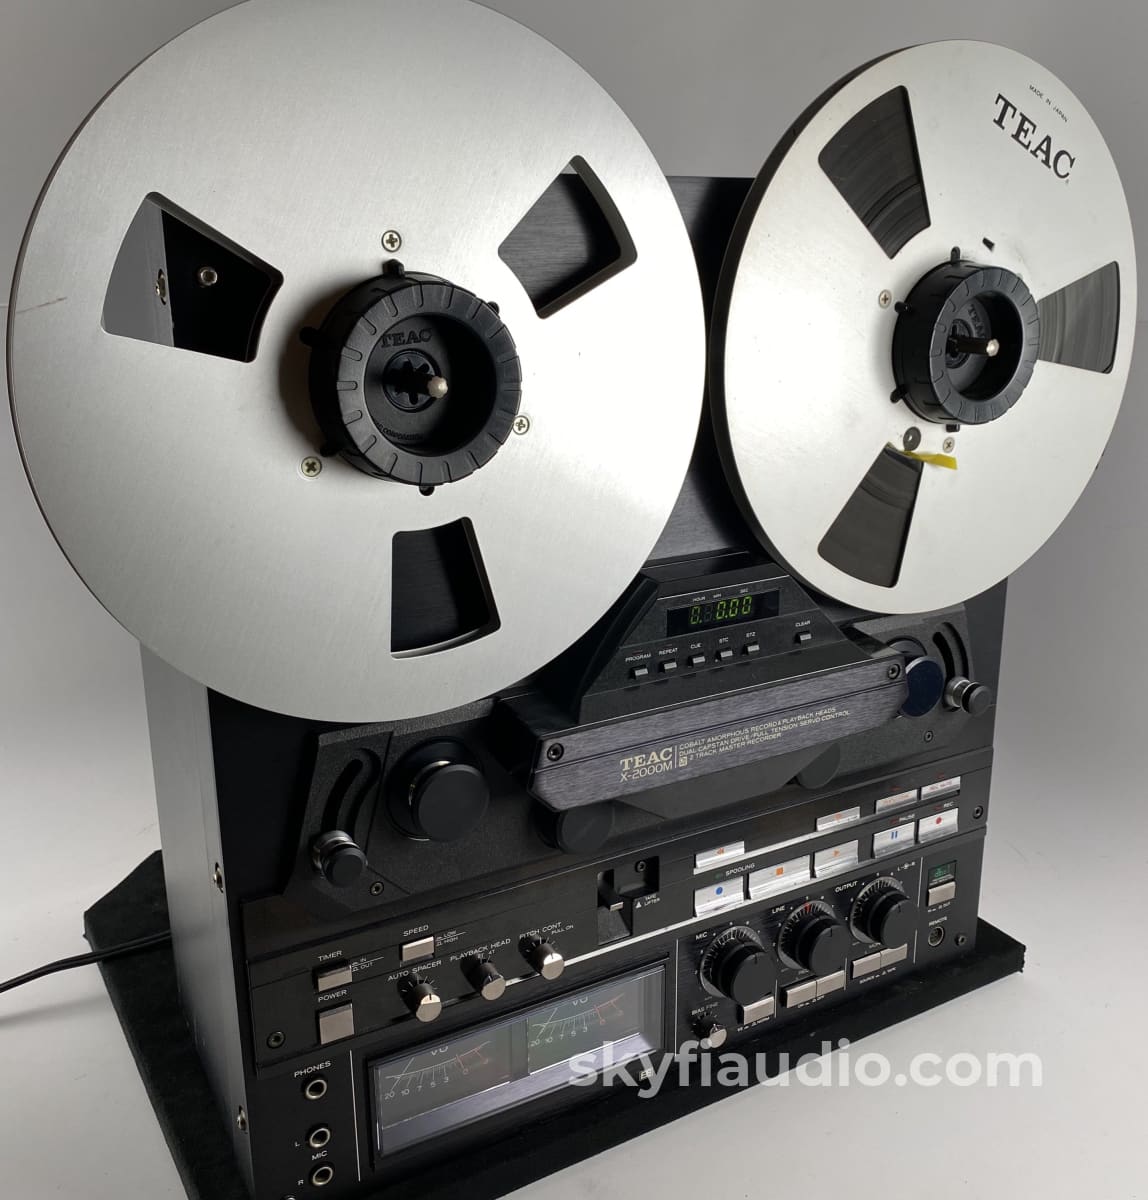 Teac X-2000M Reel to Reel Machine, 2 or 4 Track Capable, As Seen In Pu